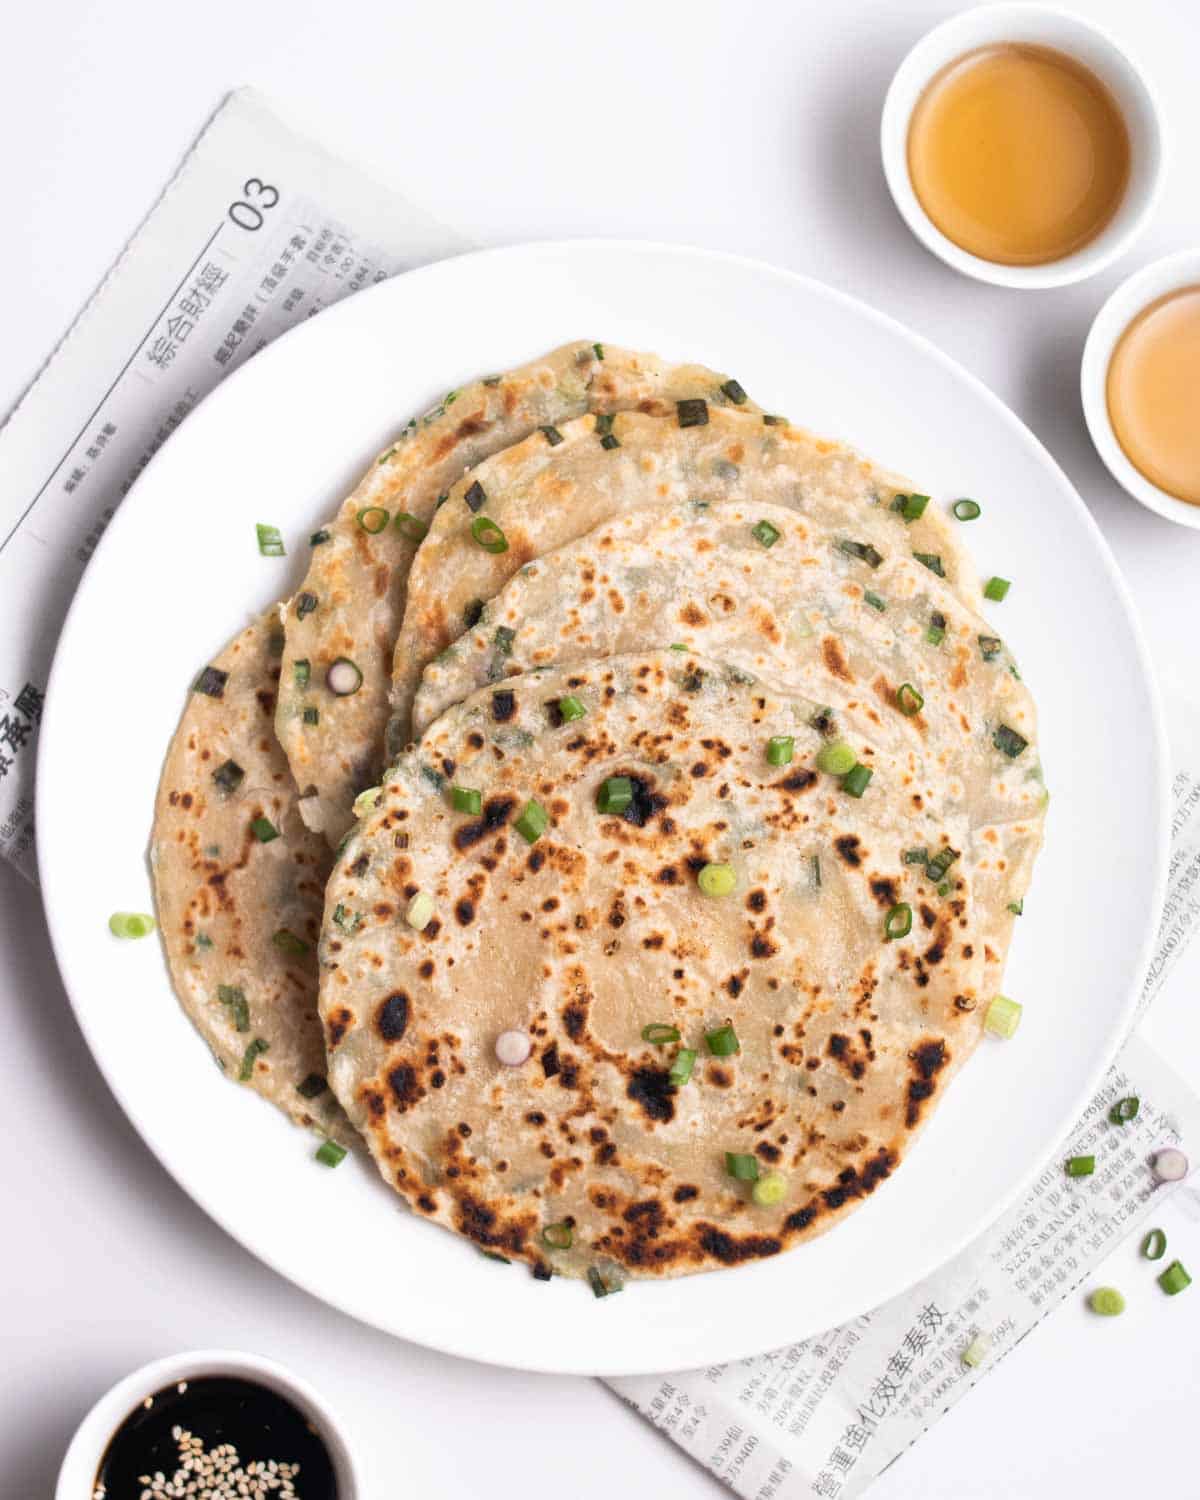 A plate of scallion pancakes with 2 cups of tea beside.